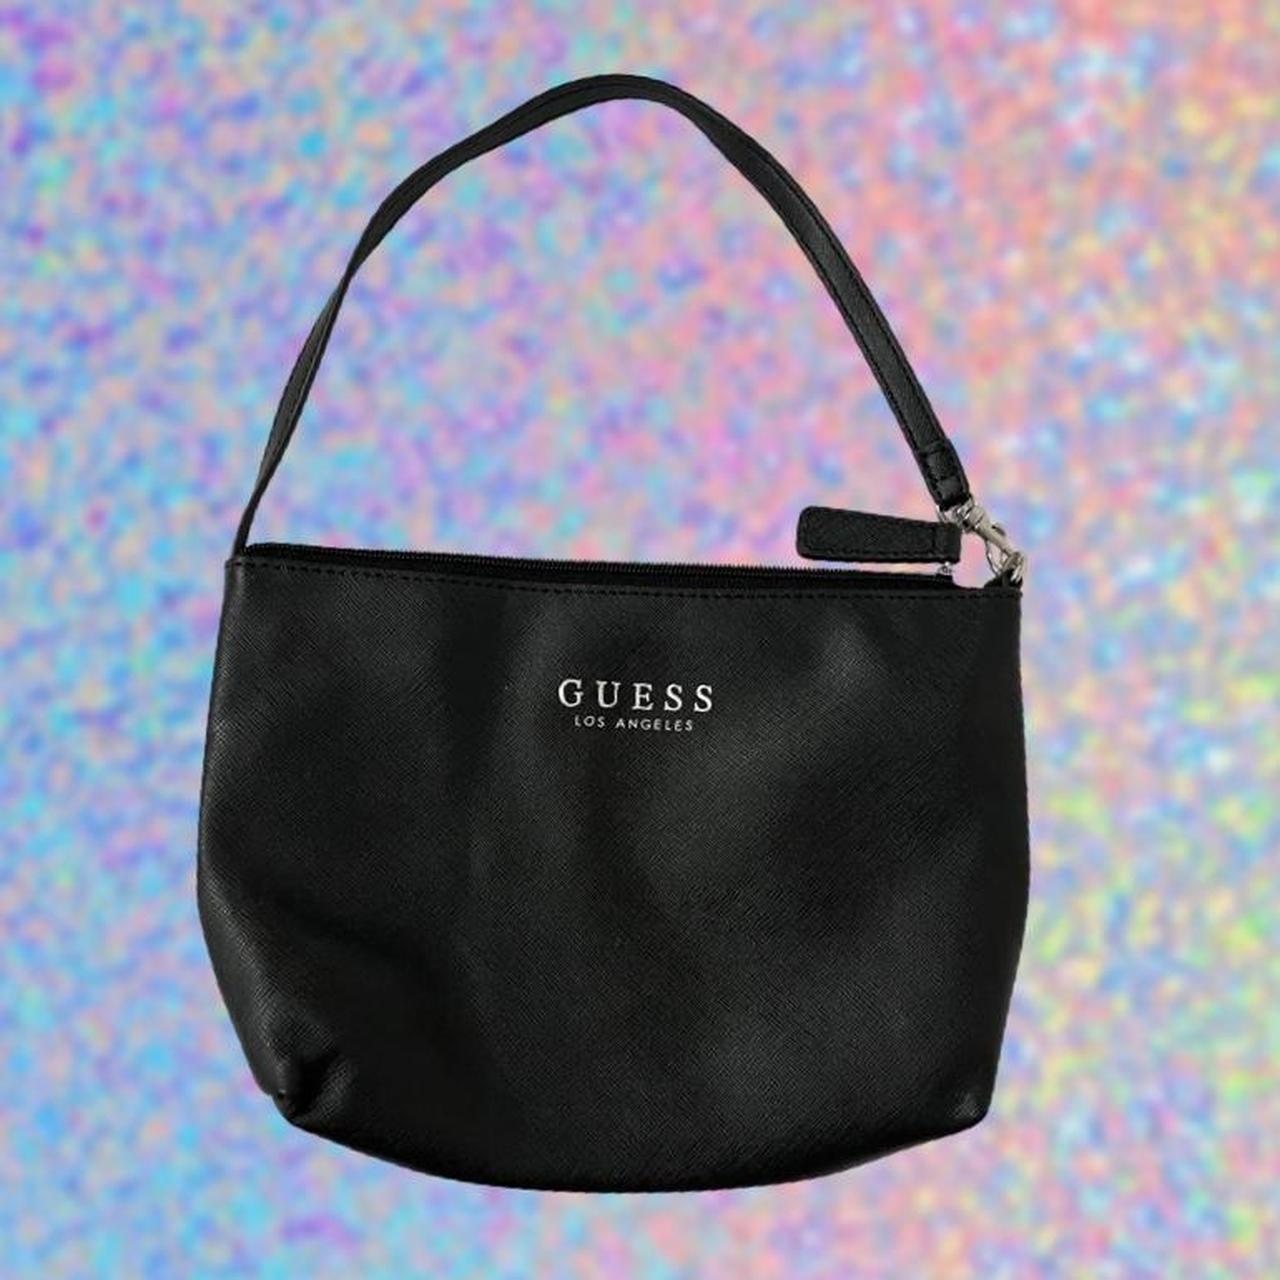 Guess Los Angeles Womens Purse Bag Rodney Carry All Classic Black SF792622  | eBay